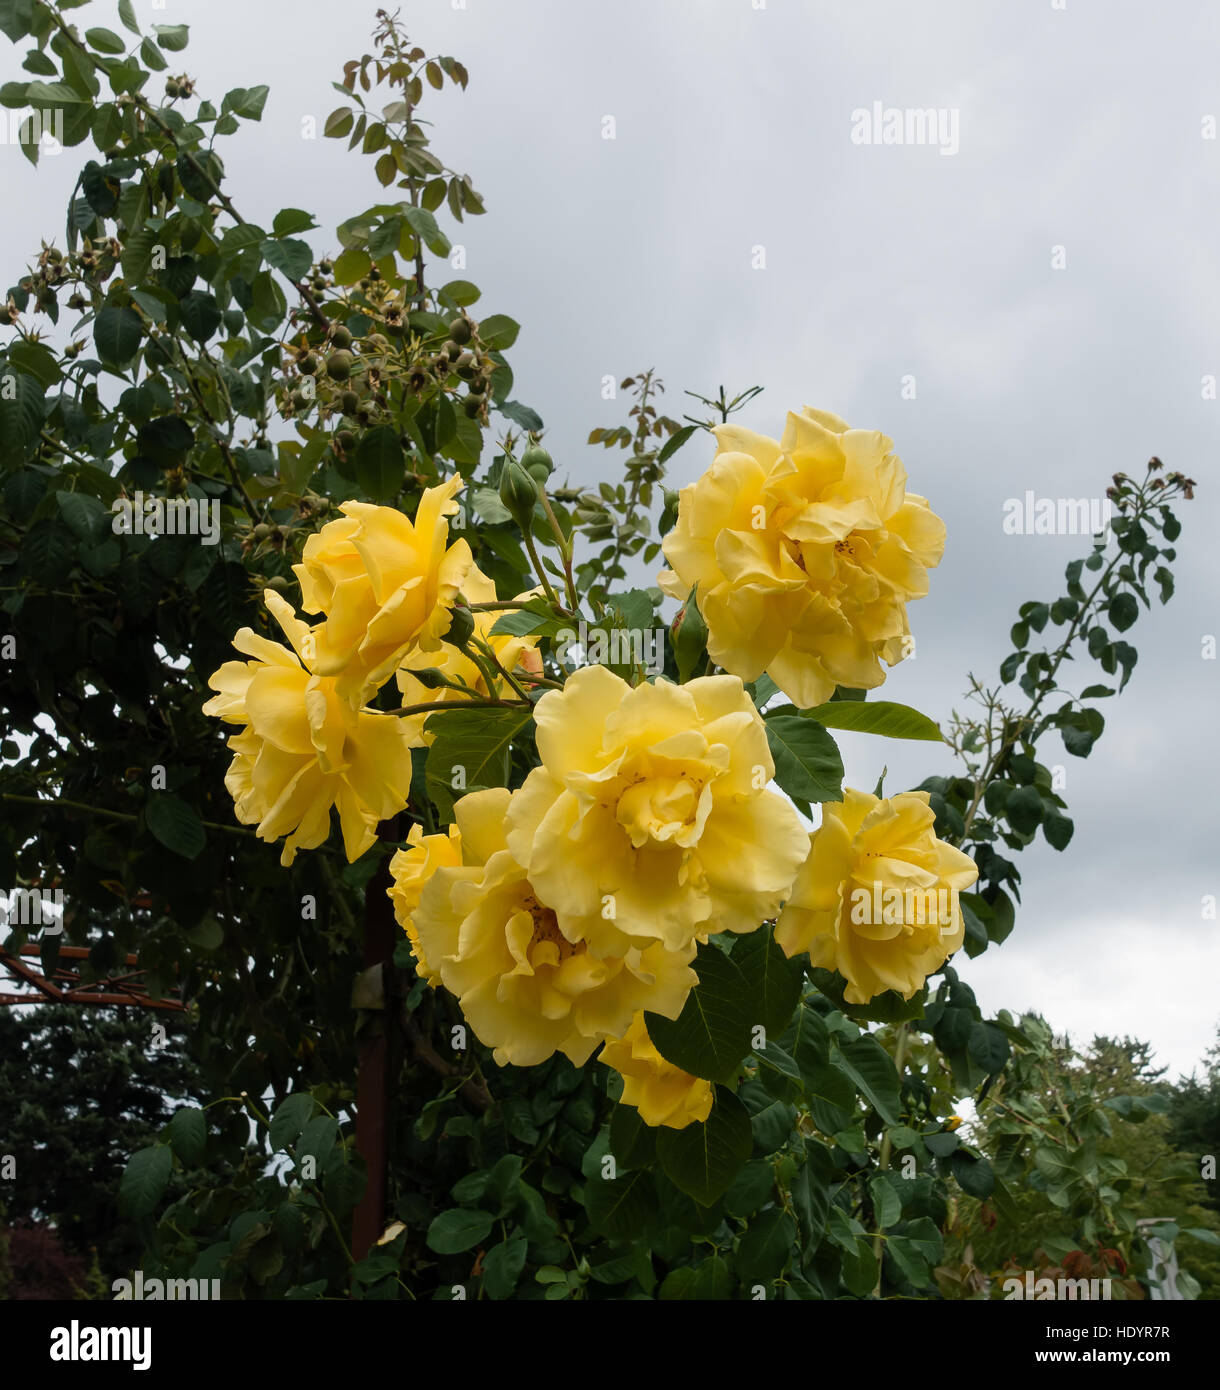 A view of a bunch of yellow roses with a gray sky in the background. Stock Photo